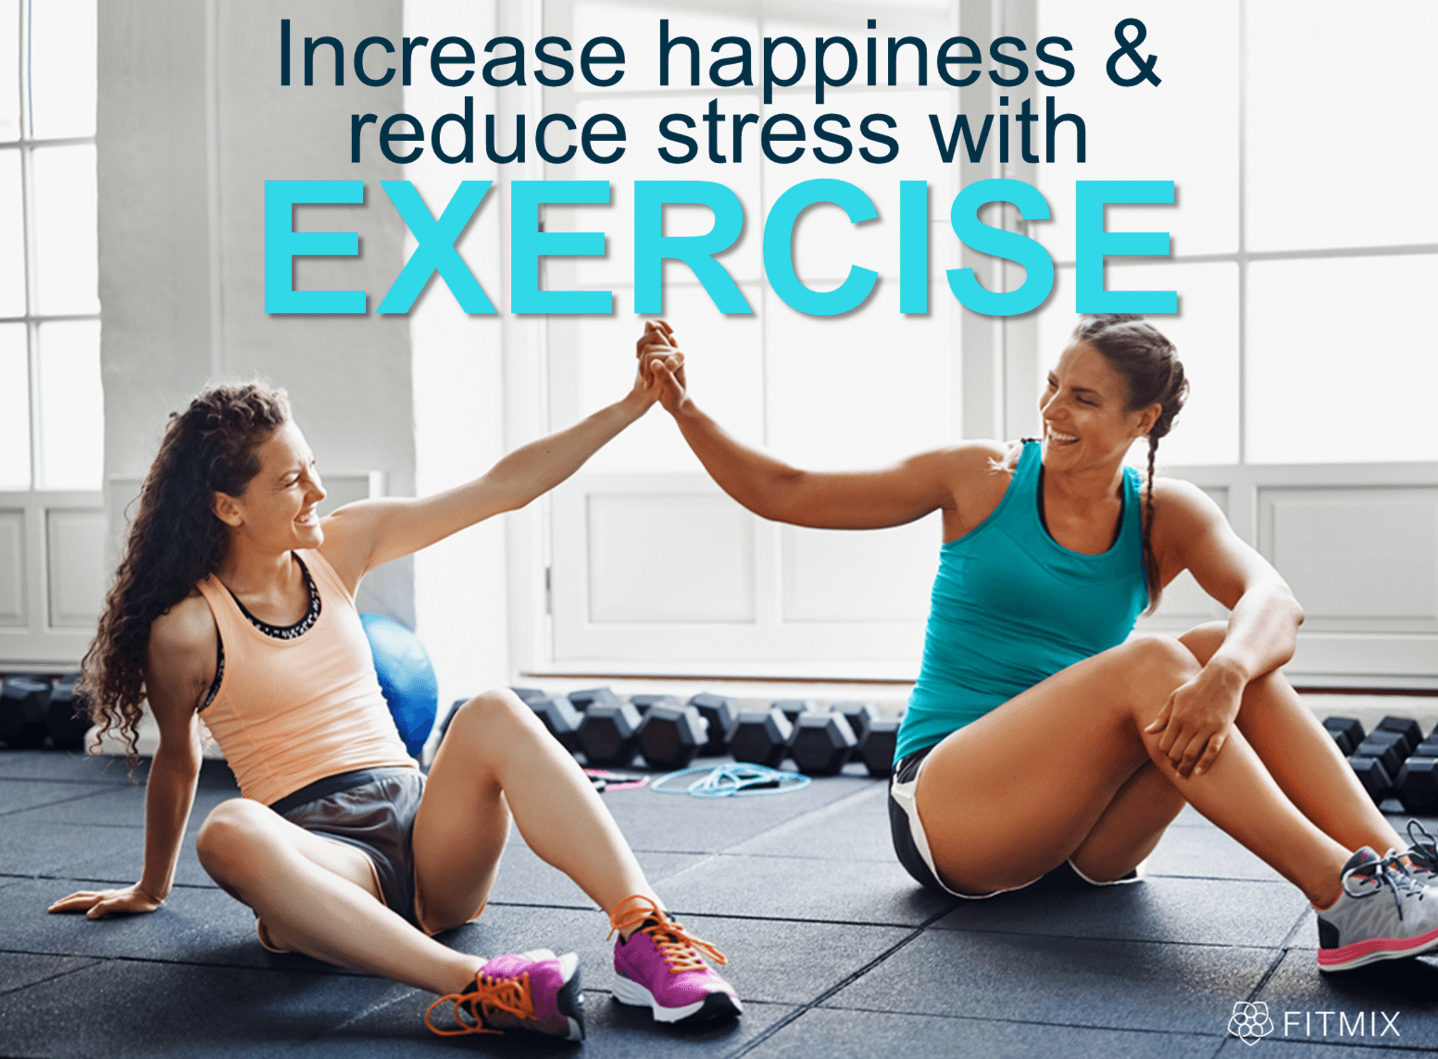 exercise to reduce stress essay